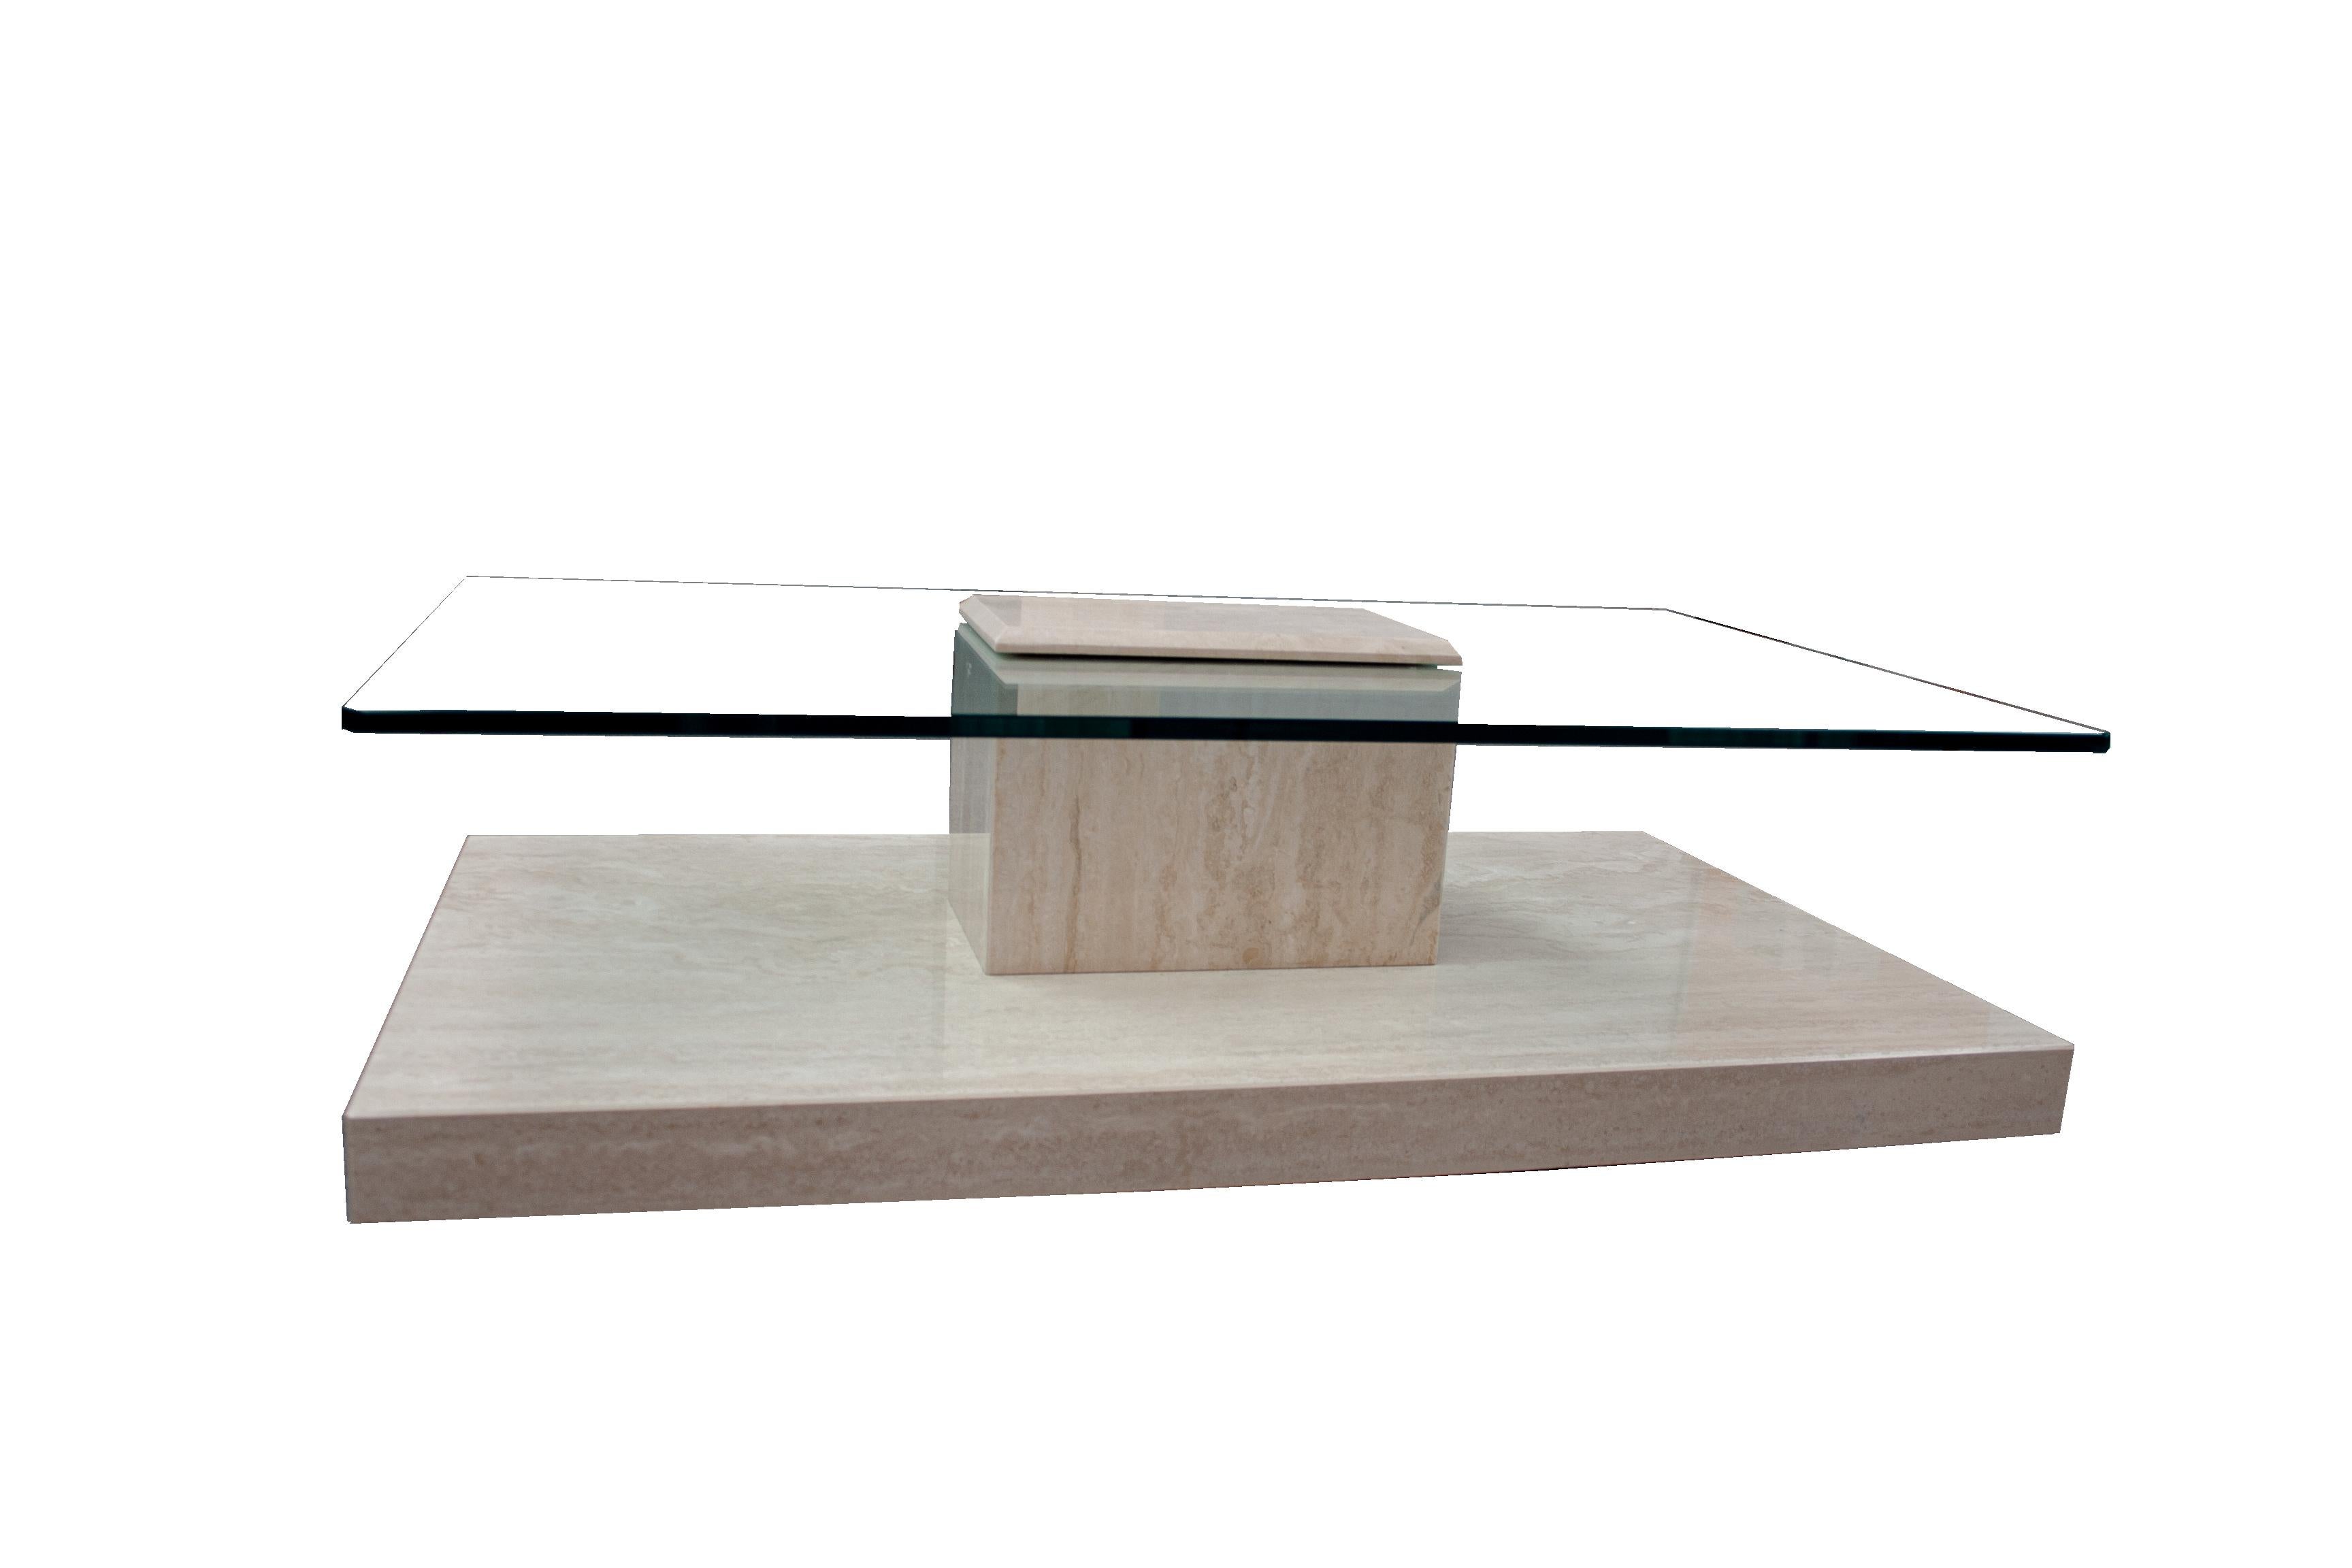 AKRA Travertine Marble & Glass Coffee Table Contemporary Design Spain In Stock.
This coffee table in polished travertine marble with glass has a very particular design, having a part of the marble that covers the glass on the surface and joins it